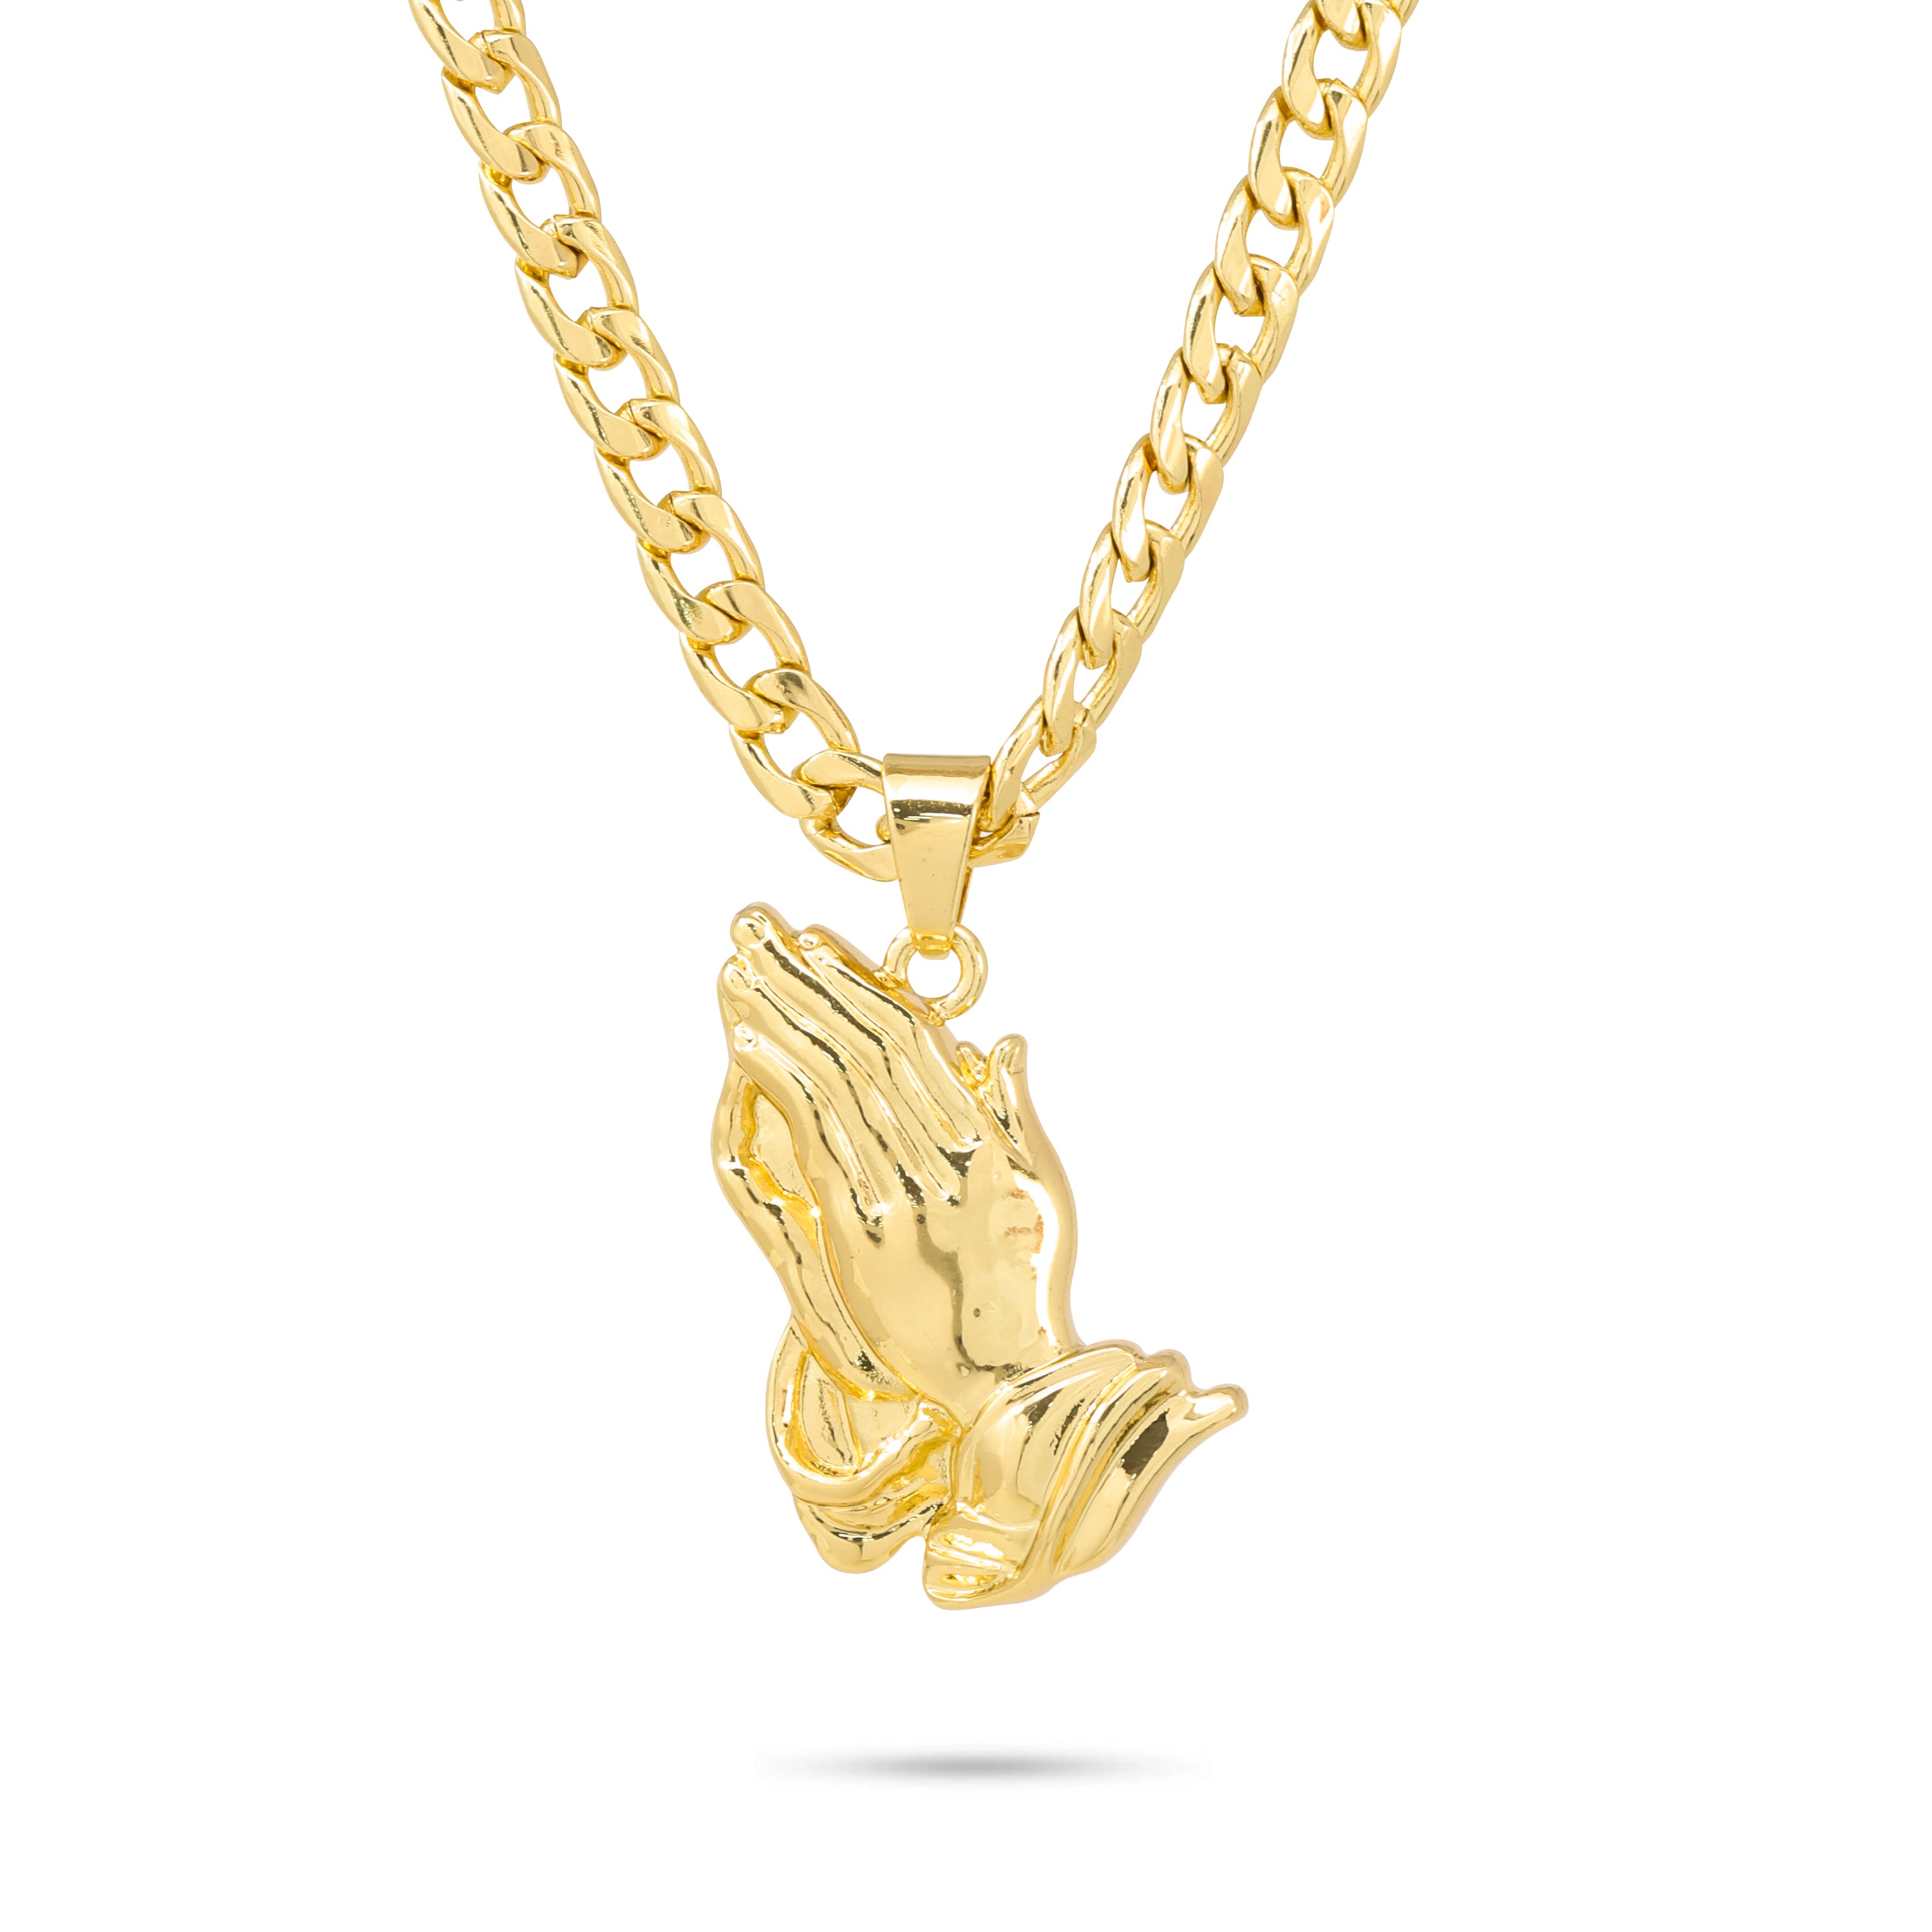 PRAYING HAND NECKLACE GOLD